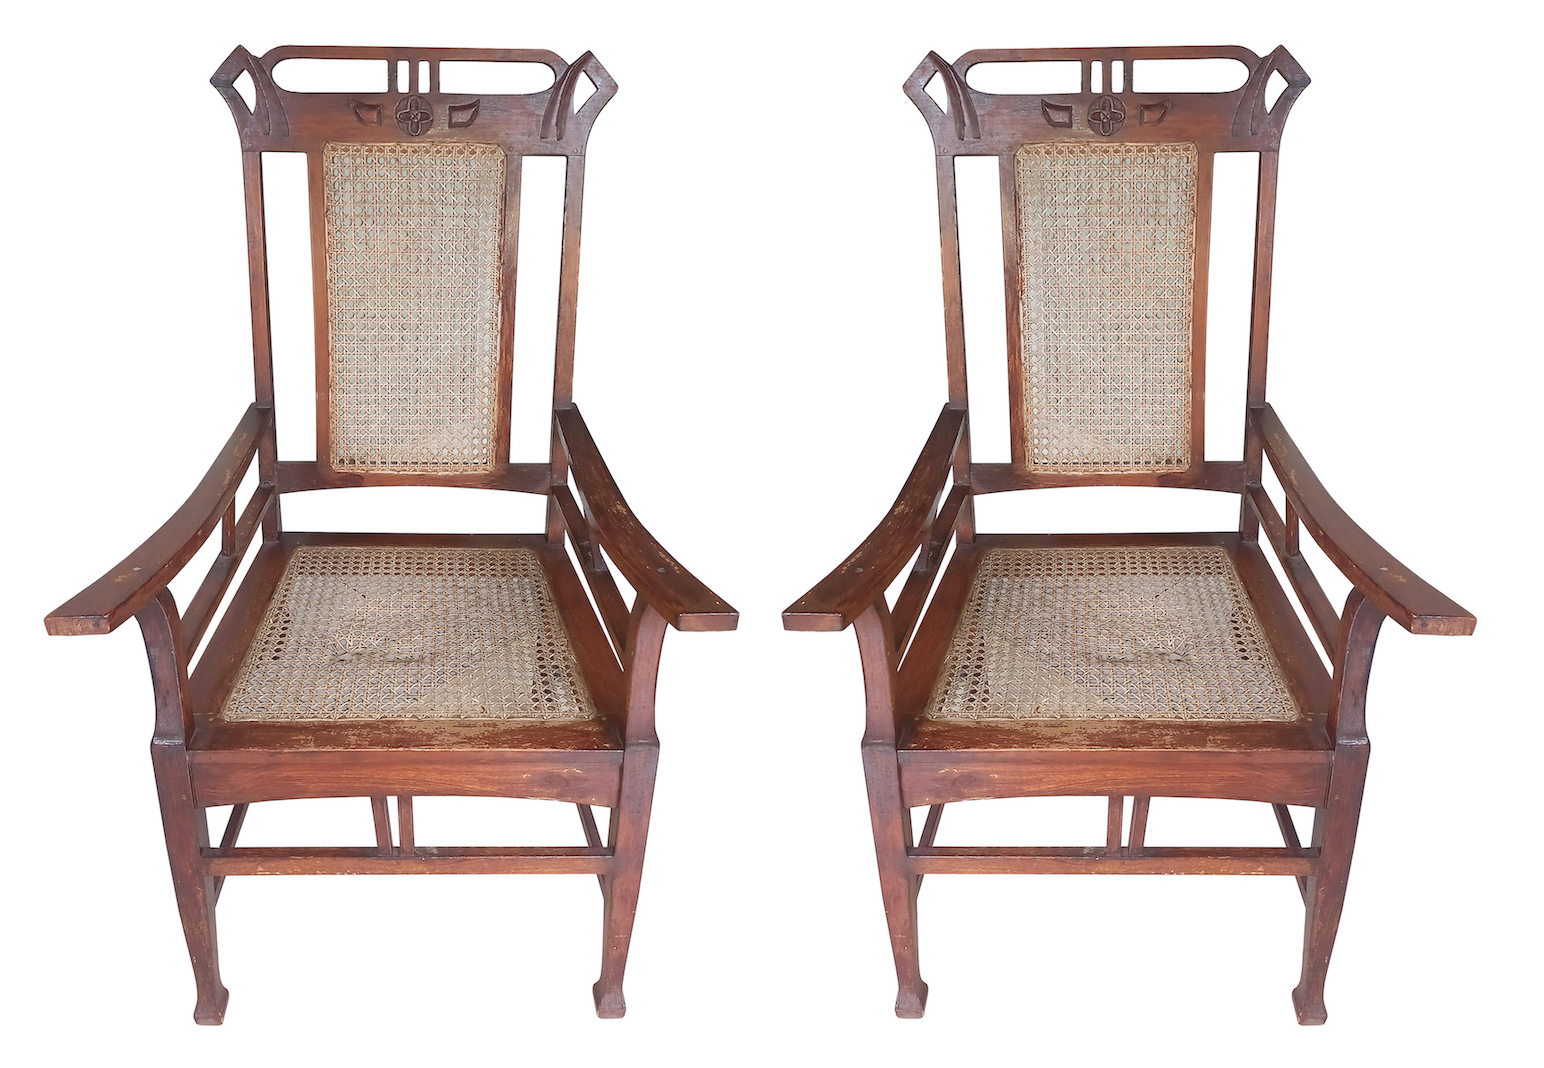 A pair of carved teak art nouveau arm chairs with rattan seat and back